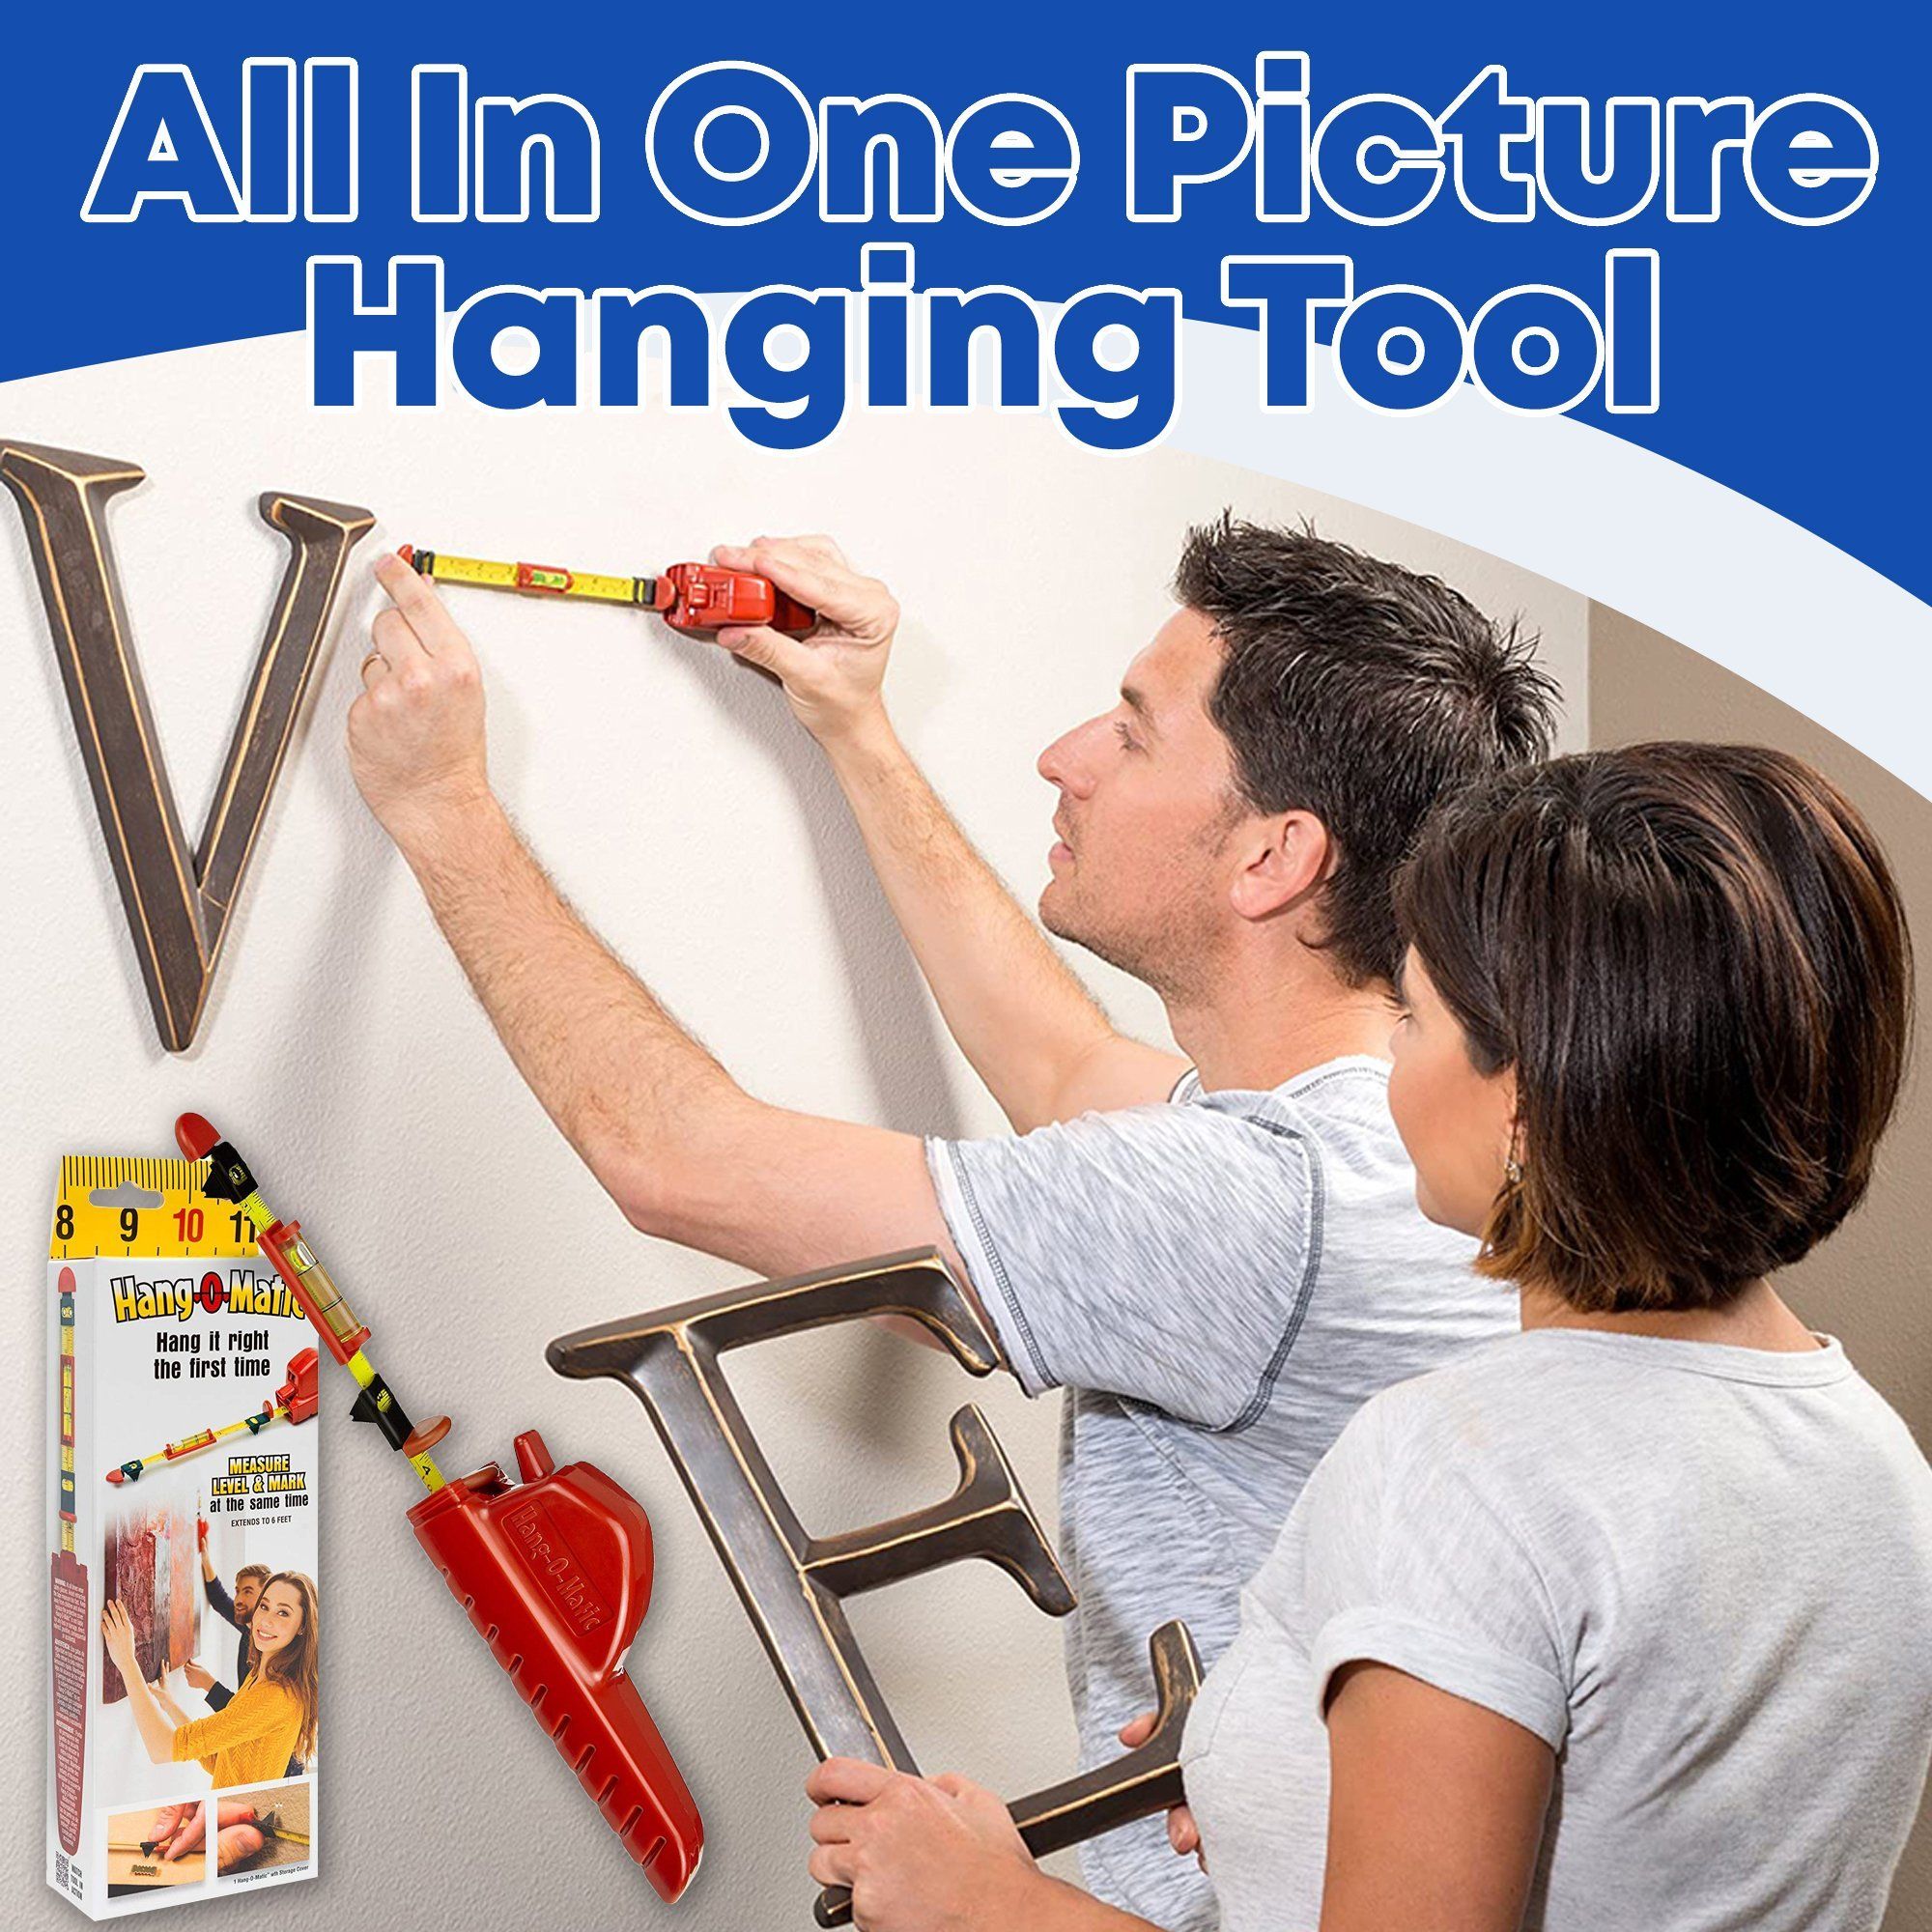 All In One Picture Hanging Tool